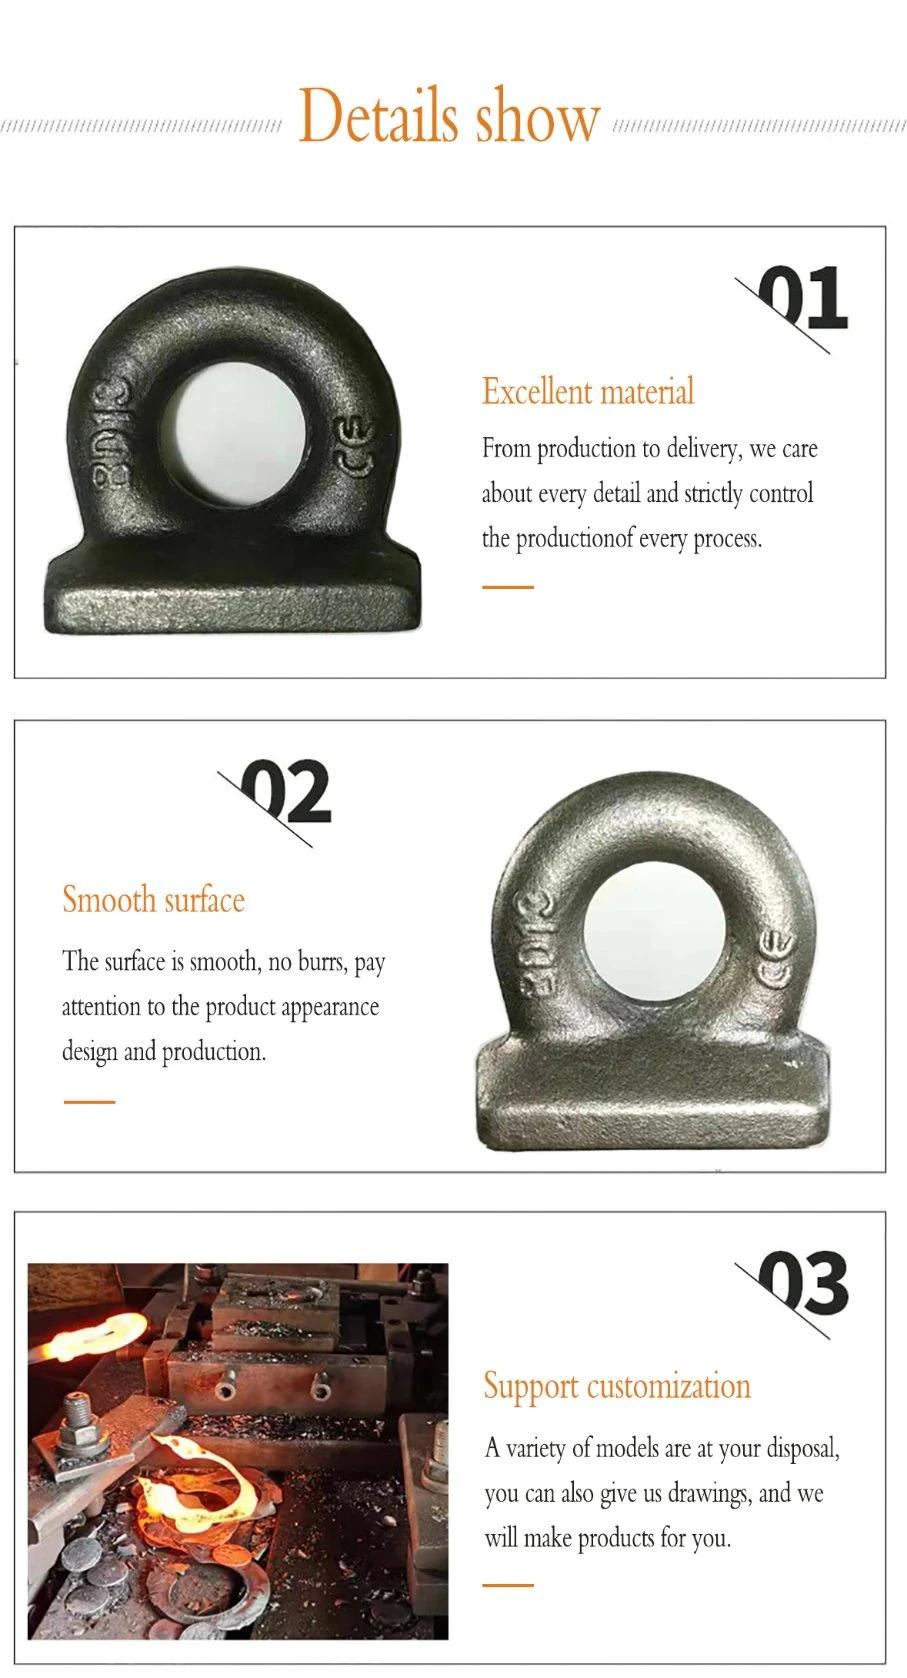 Hot-DIP Galvanized Forging Lifting Eye Bolt for Marine Hardware Accessories